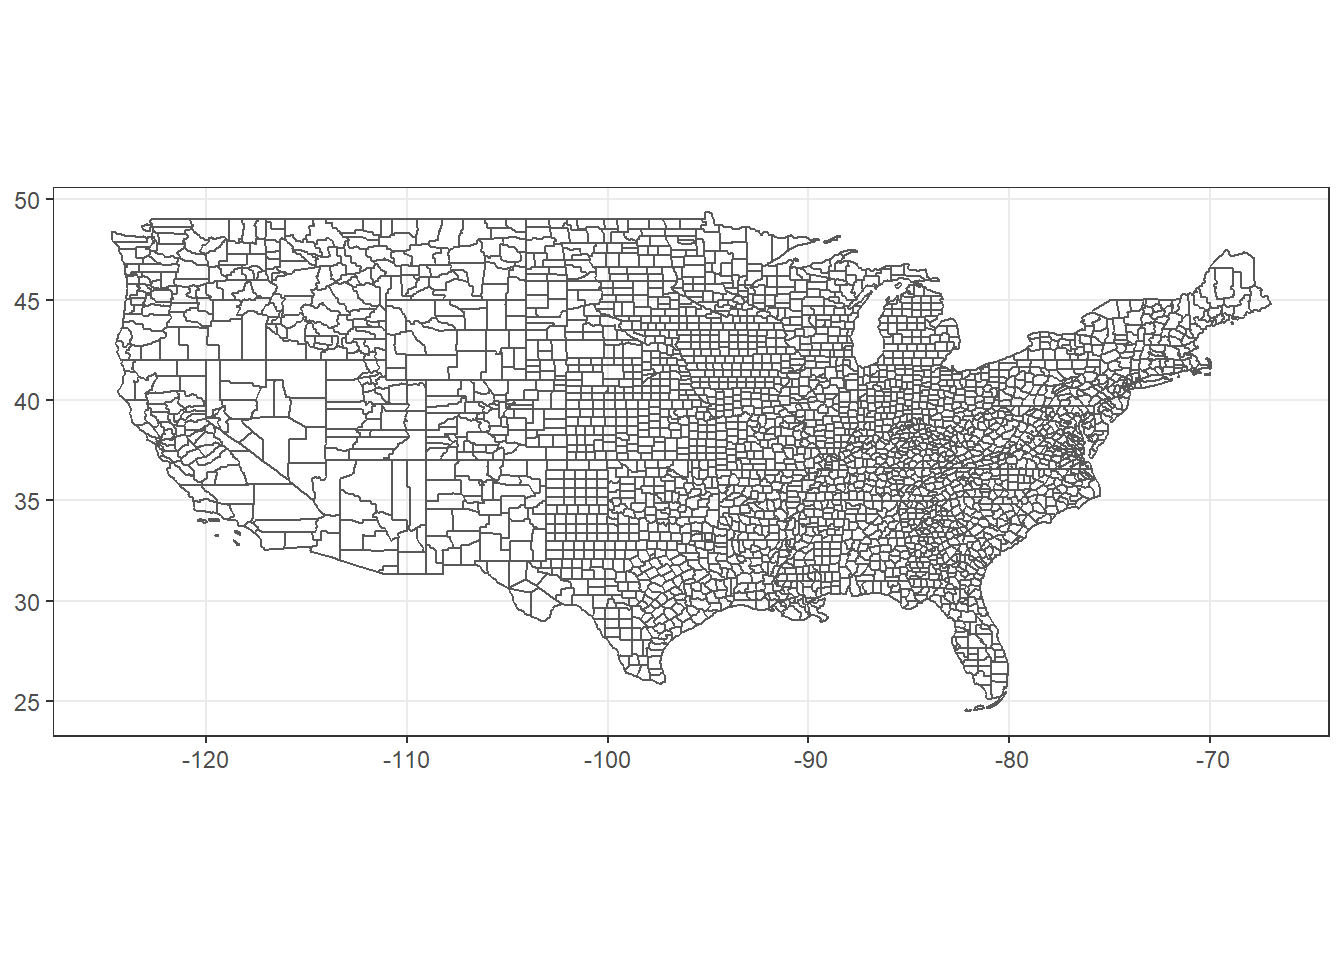 U.S. counties mapped in a geographic coordinate system using a dataset that is missing CRS information.